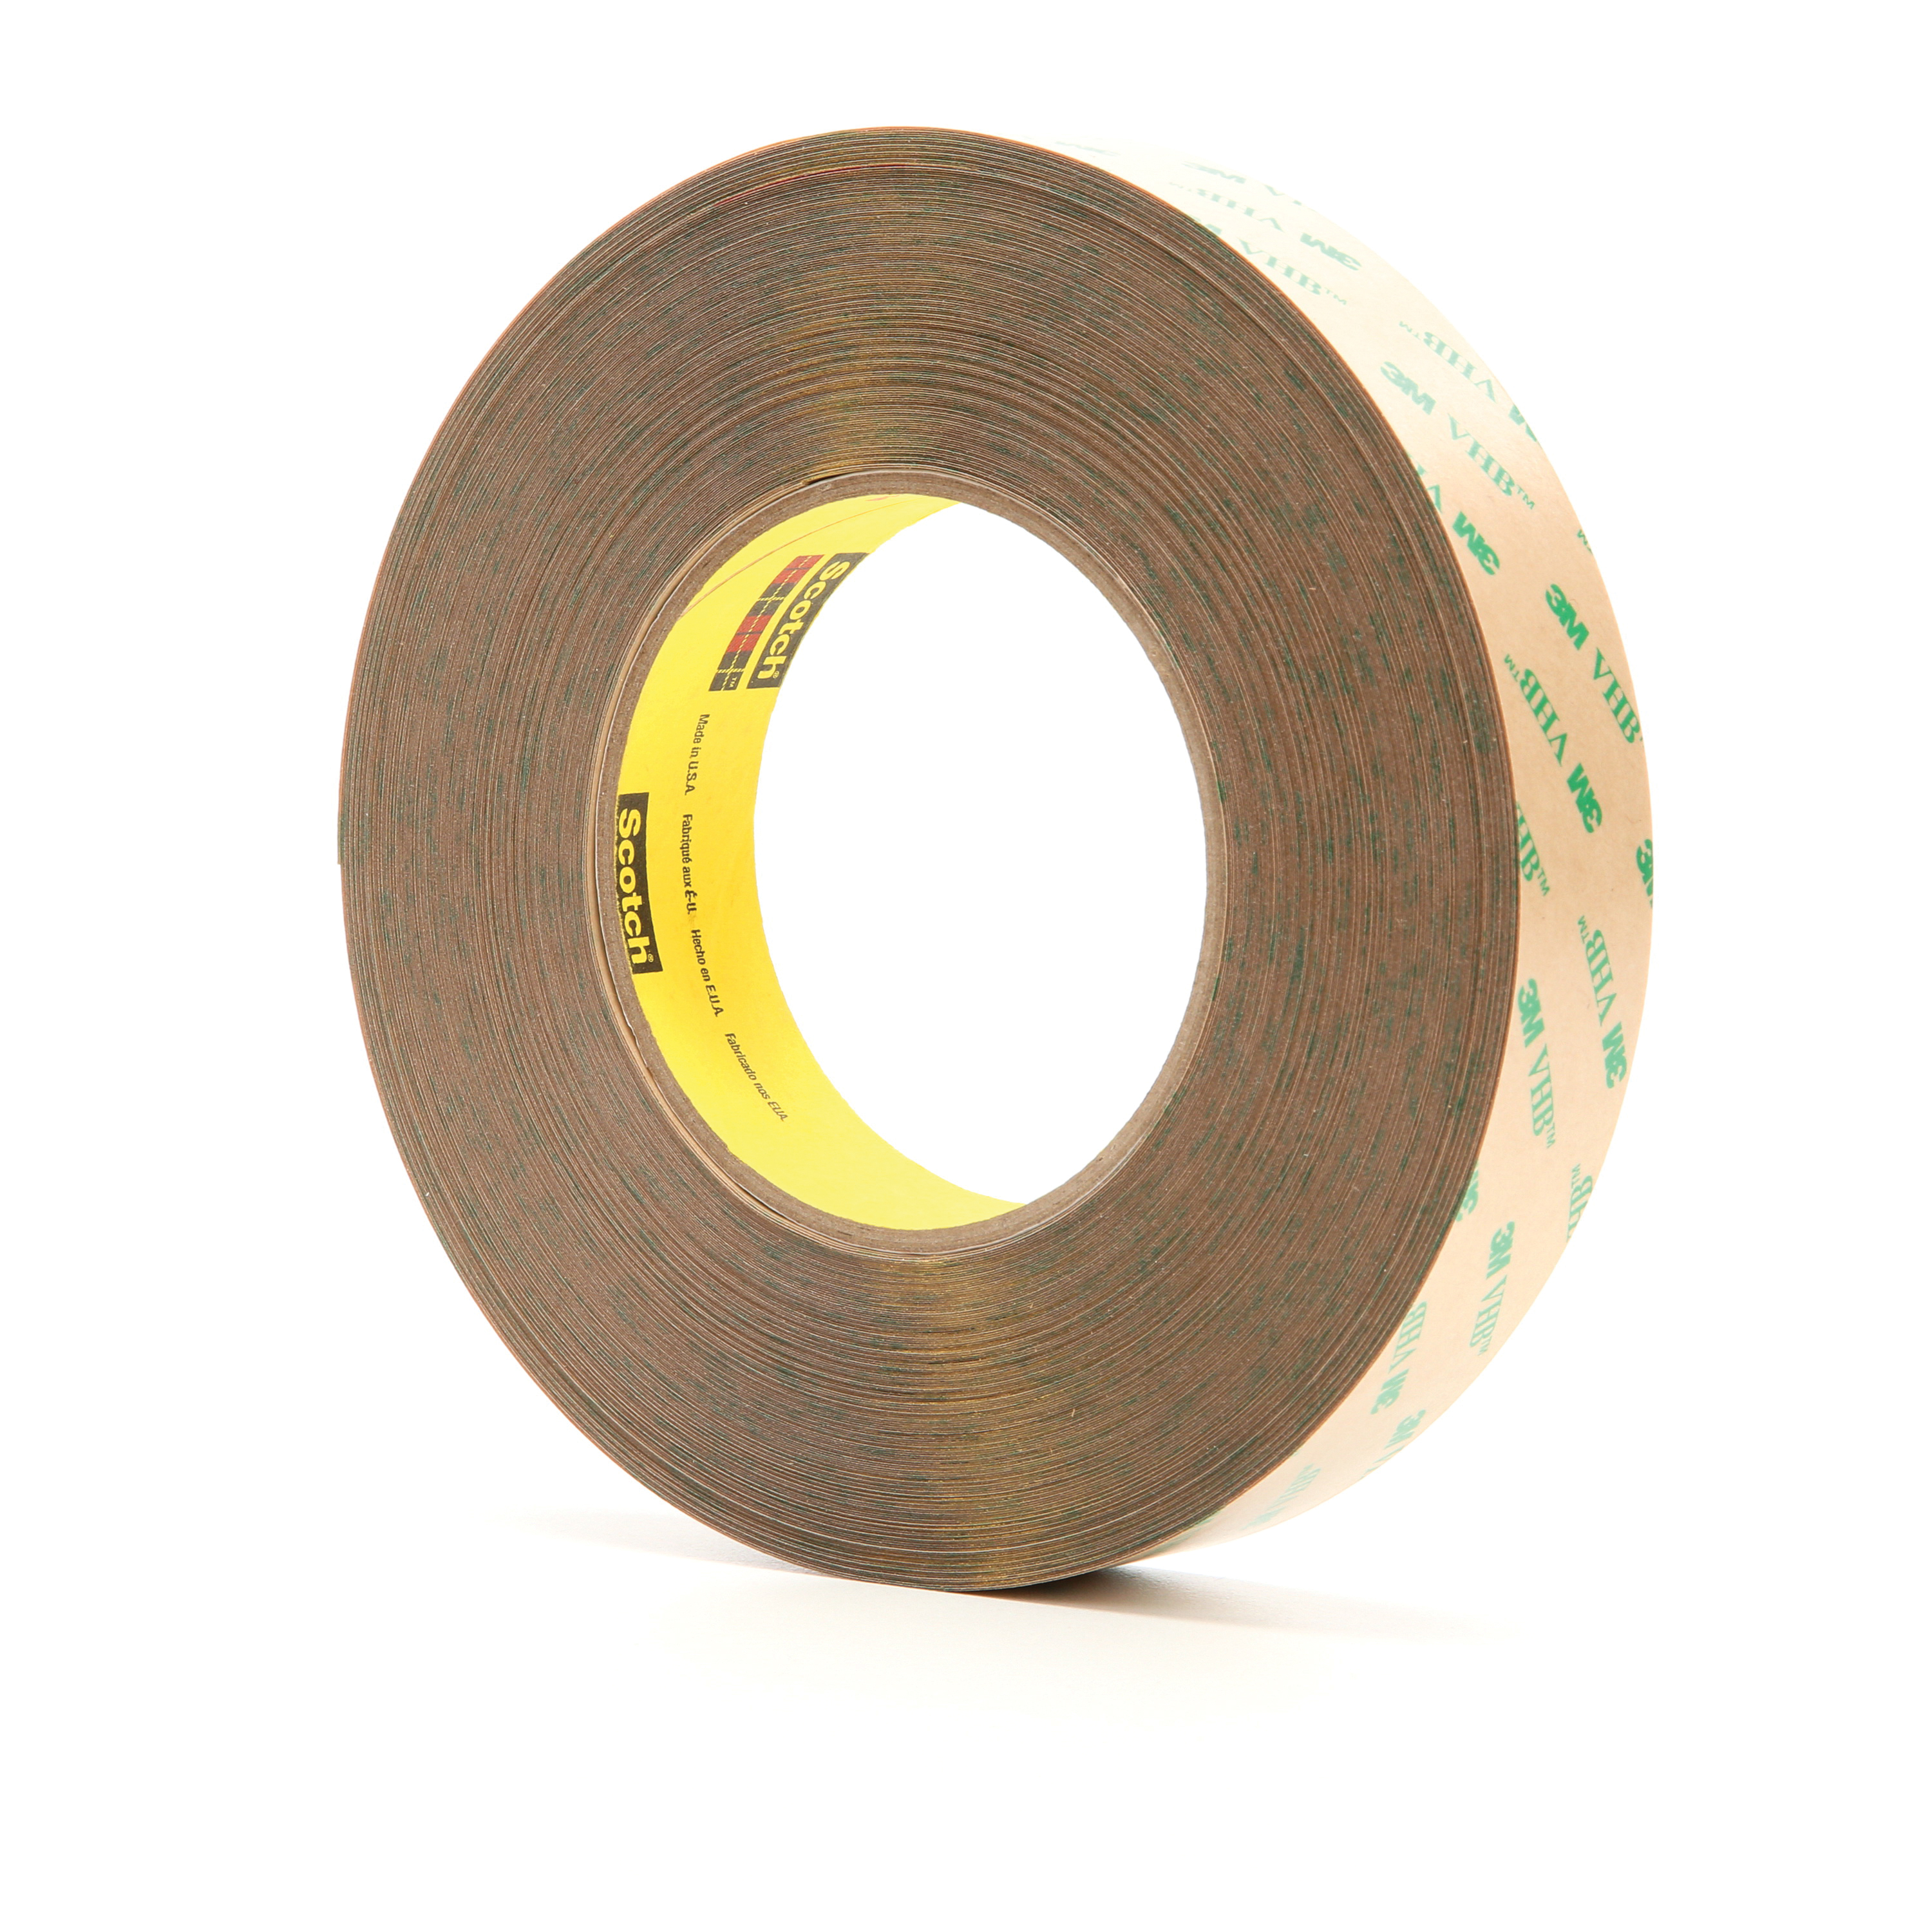 3M™ VHB™ 021200-13971 High Performance Low Tack Adhesive Transfer Tape, 60 yd L x 1 in W, 9.2 mil THK, 5 mil 100MP Acrylic Adhesive, Clear